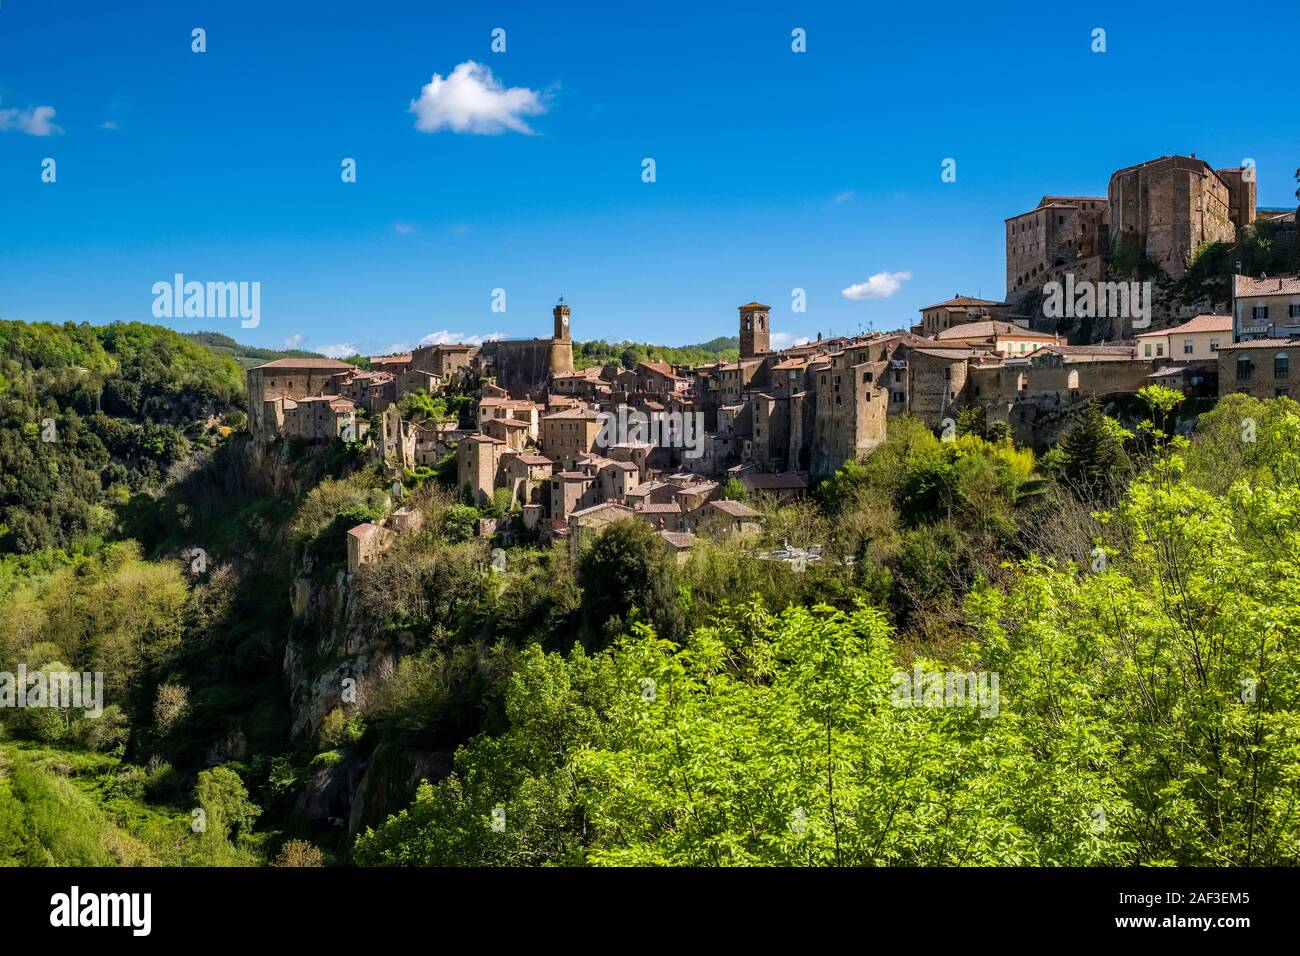 The medieval town is located at the end of a wooded valley, the stone walls of the Fortezza Orsini overtopping the houses Stock Photo